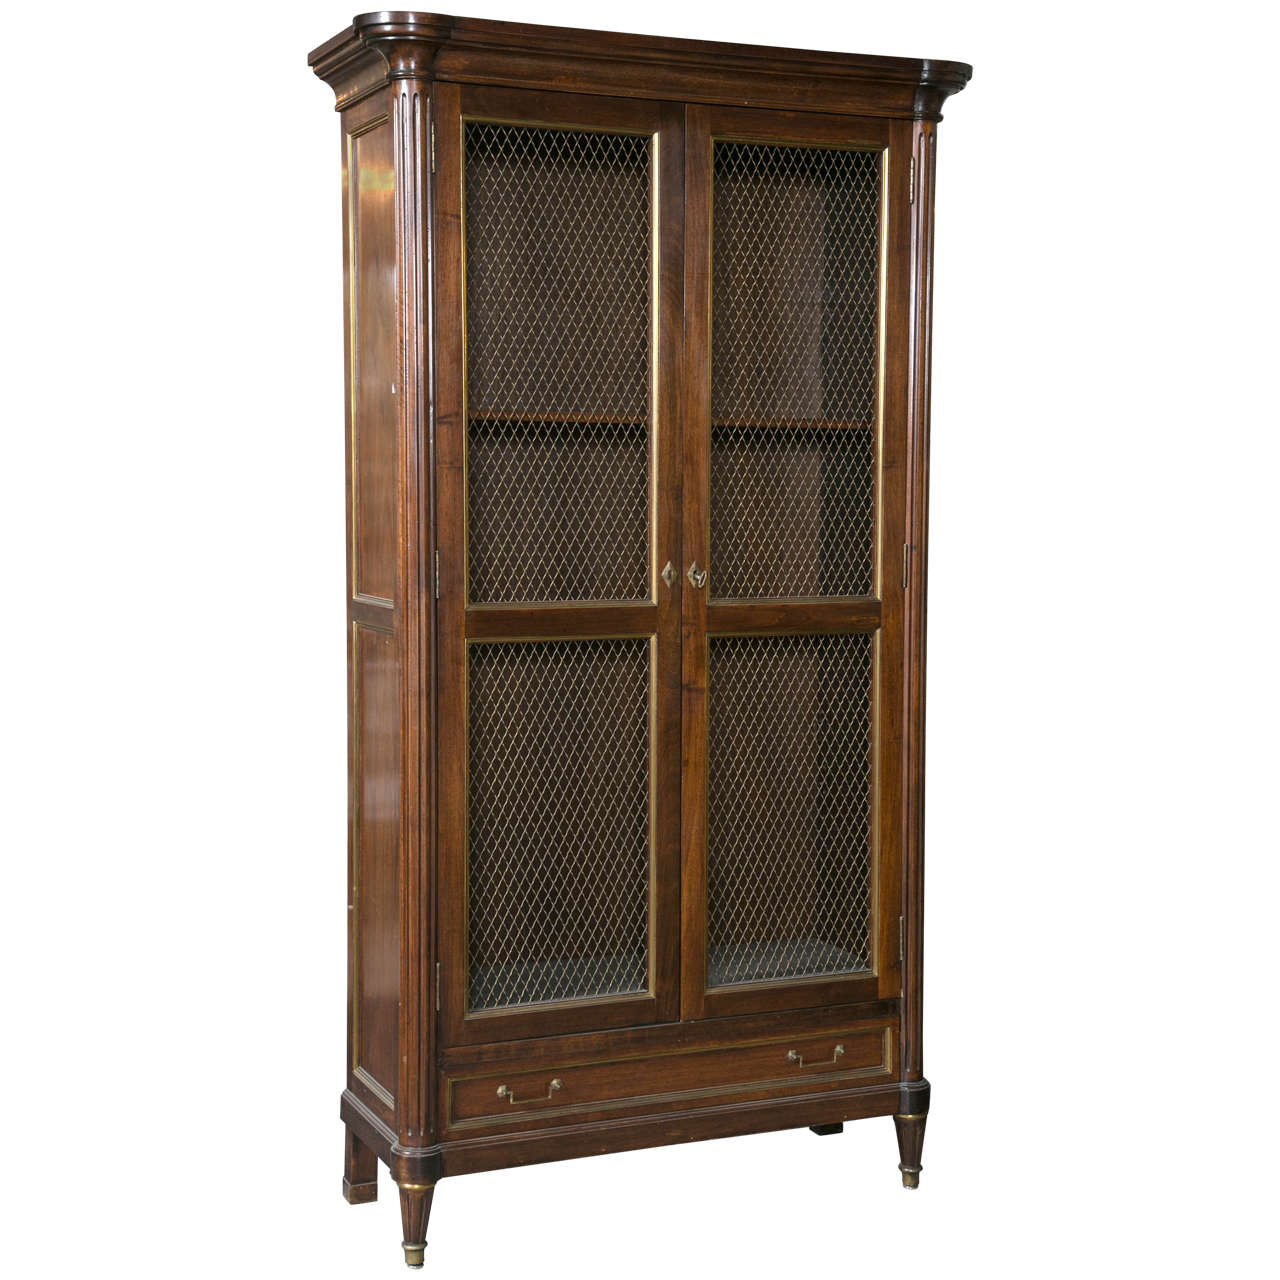 French Neoclassical Style Mahogany Bookcase Cabinet